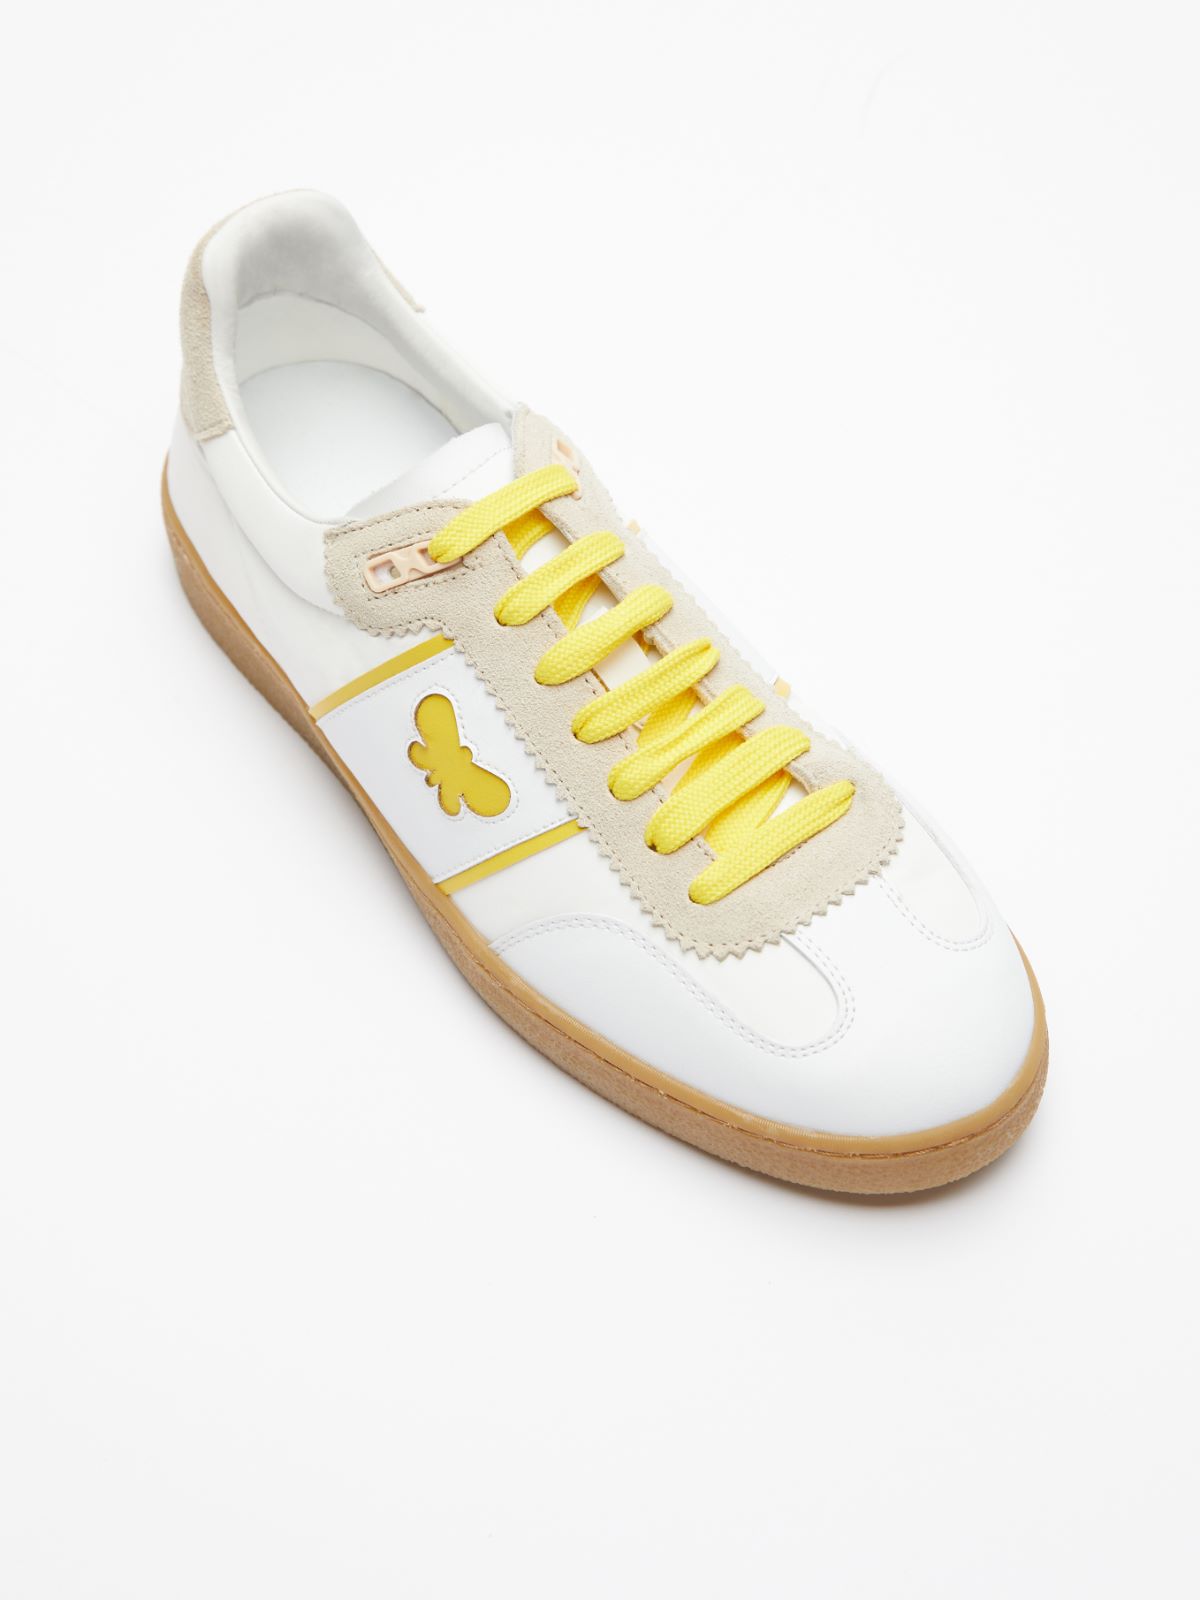 Trainers in technical fabric and leather - BRIGHT YELLOW - Weekend Max Mara - 6